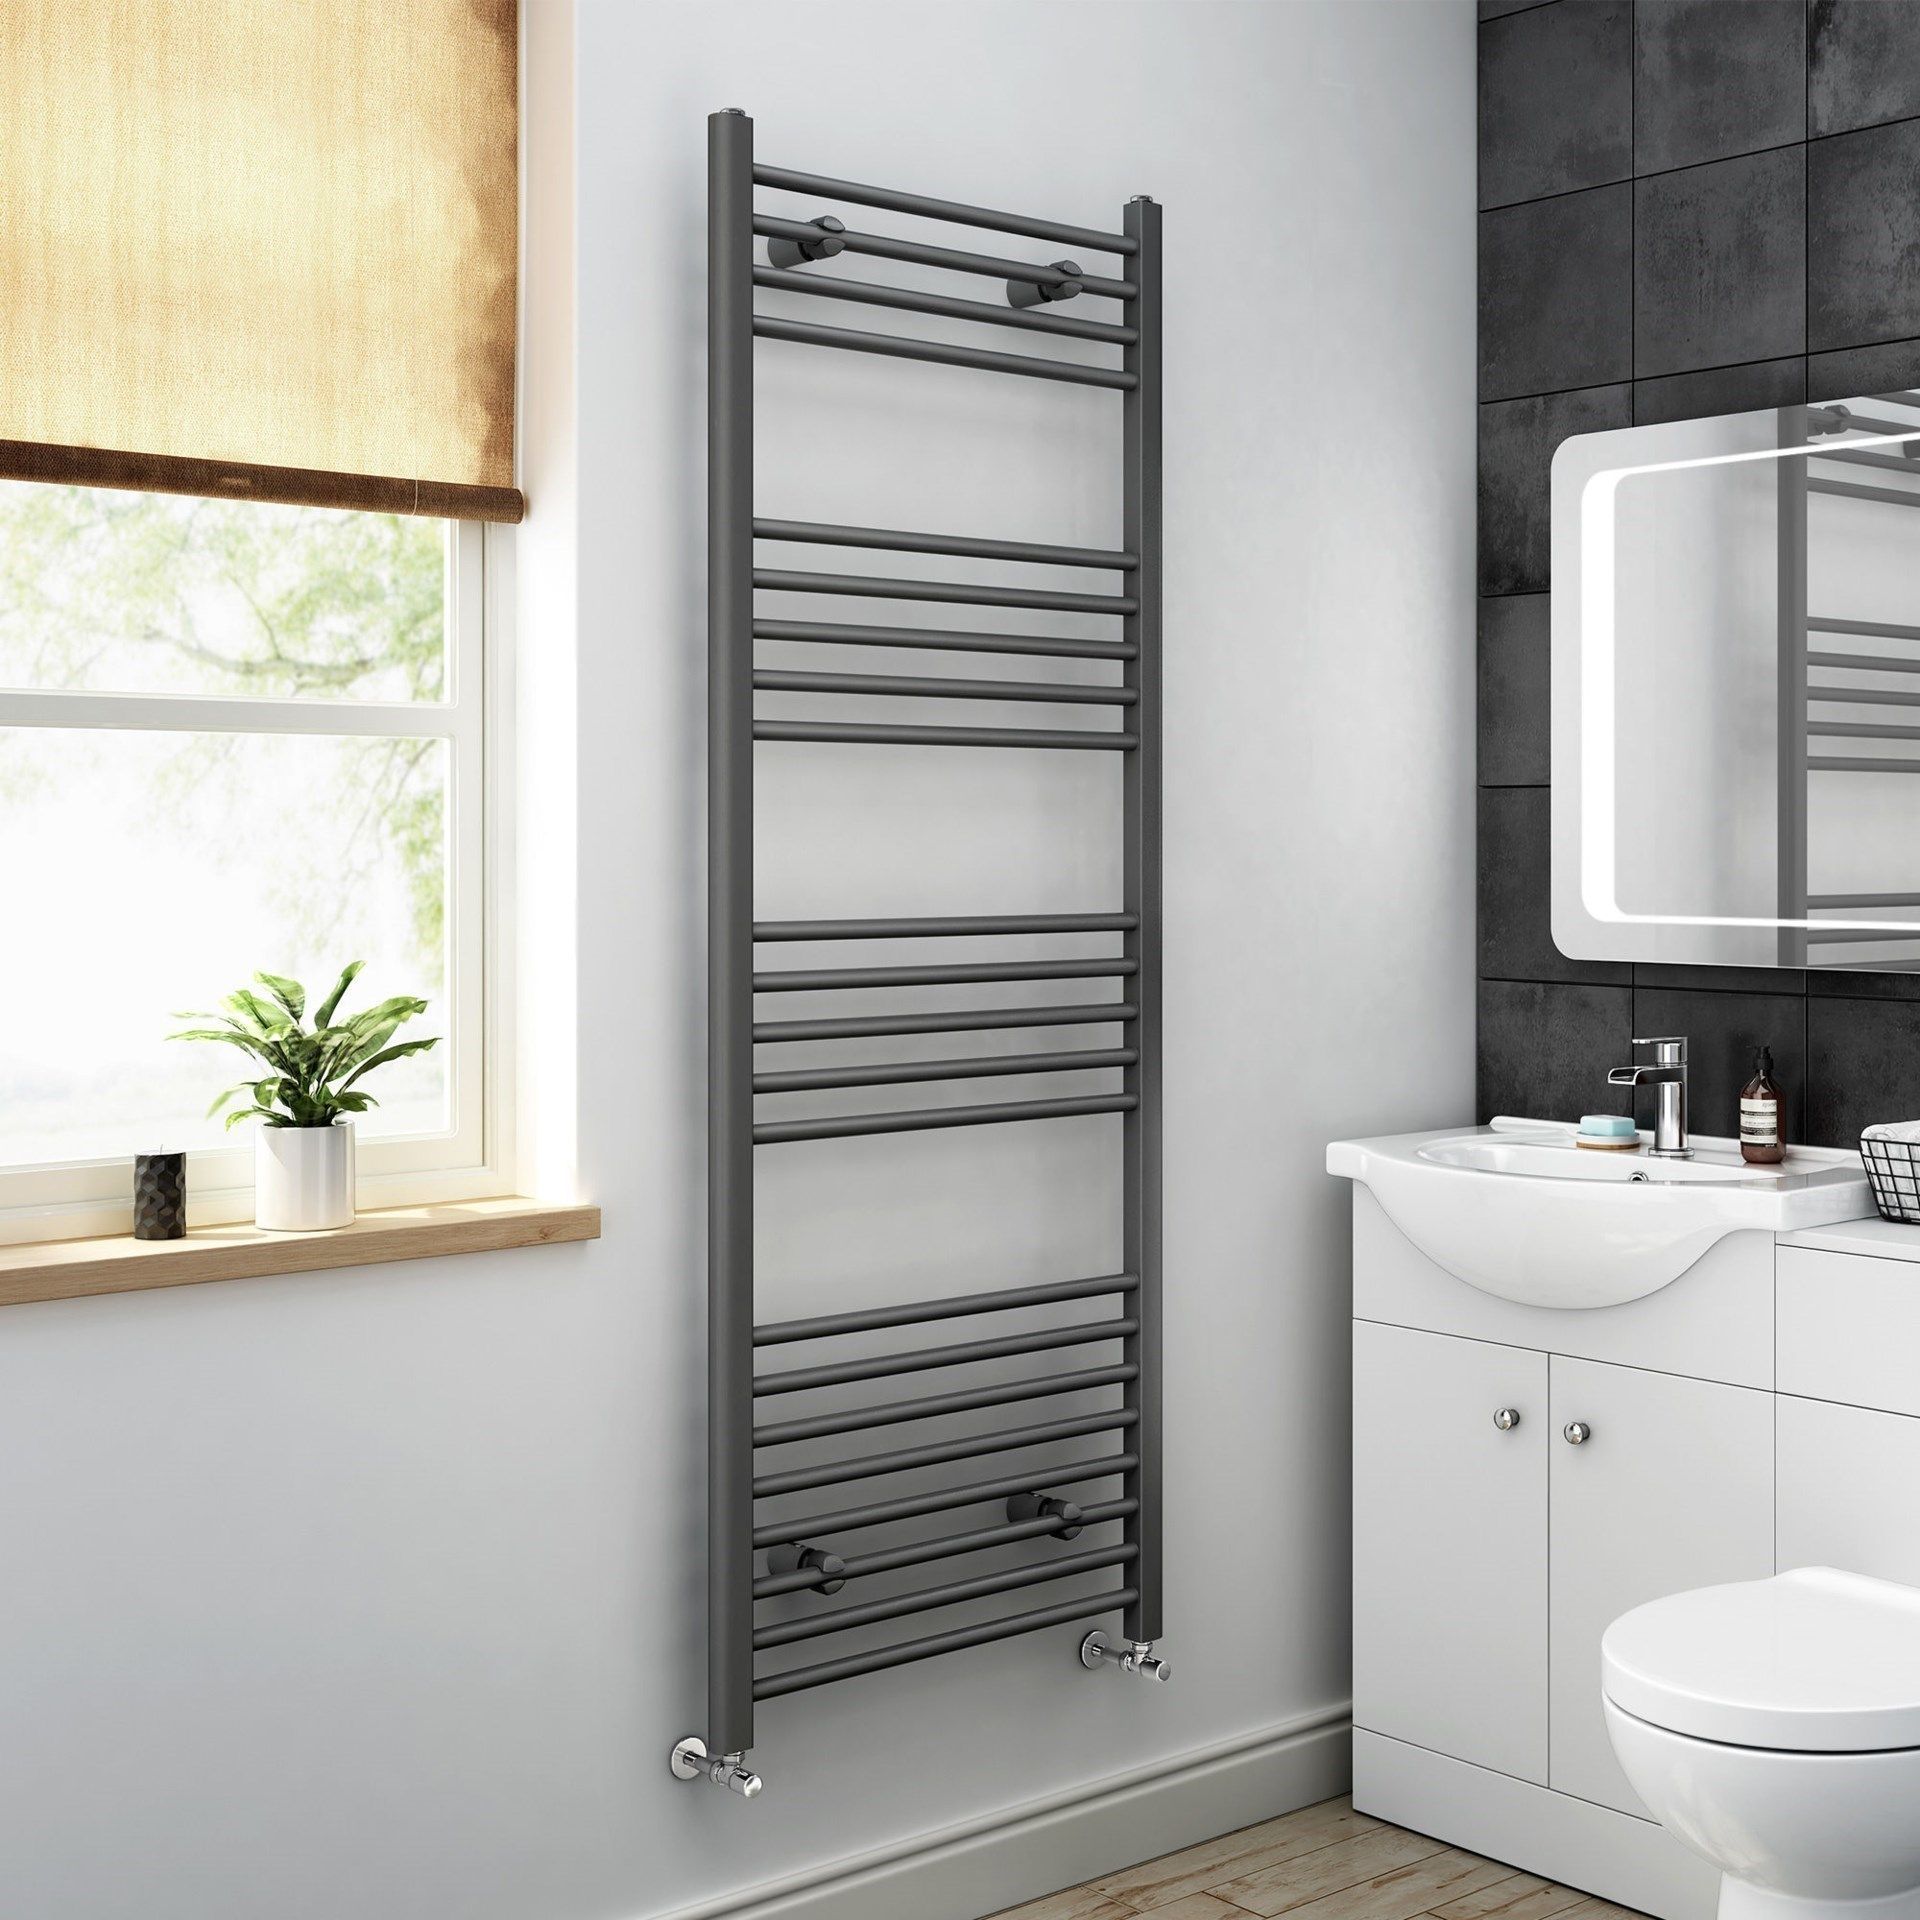 BRAND NEW BOXED 1600x600mm - 20mm Tubes - Anthracite Heated Straight Rail Ladder Towel Radiator.